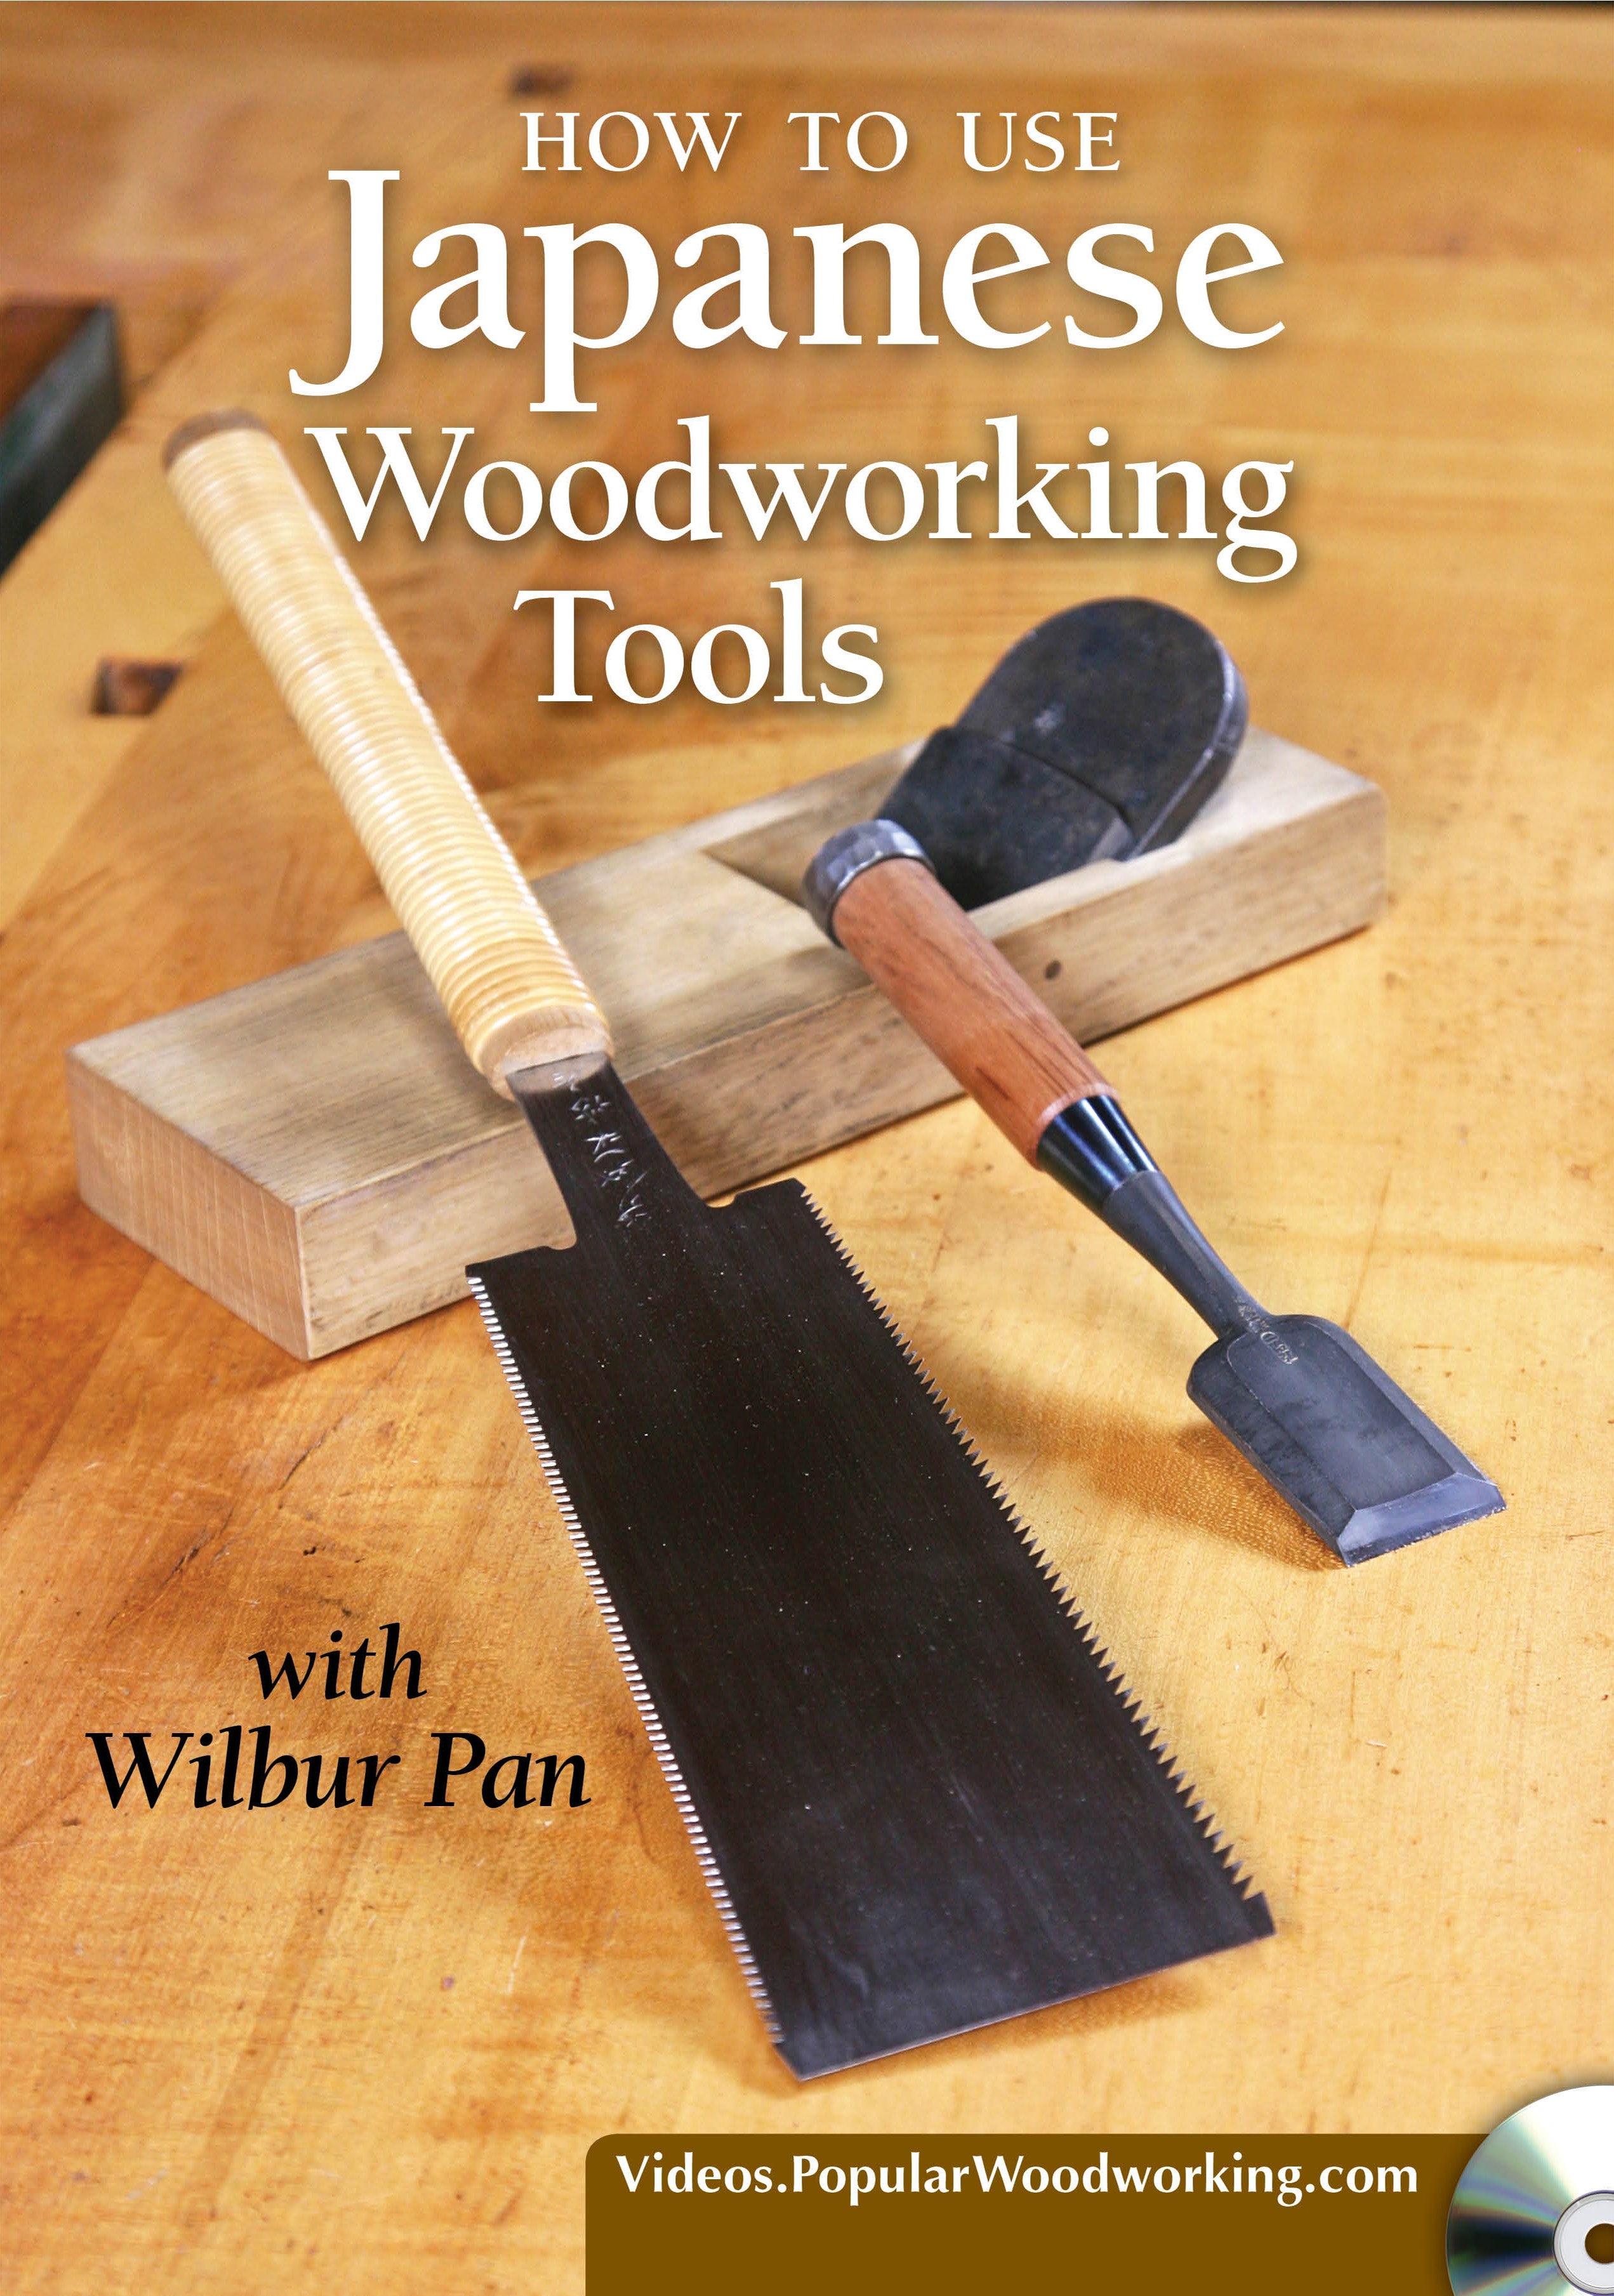 How to Use Japanese Woodworking Tools Video Download – Popular